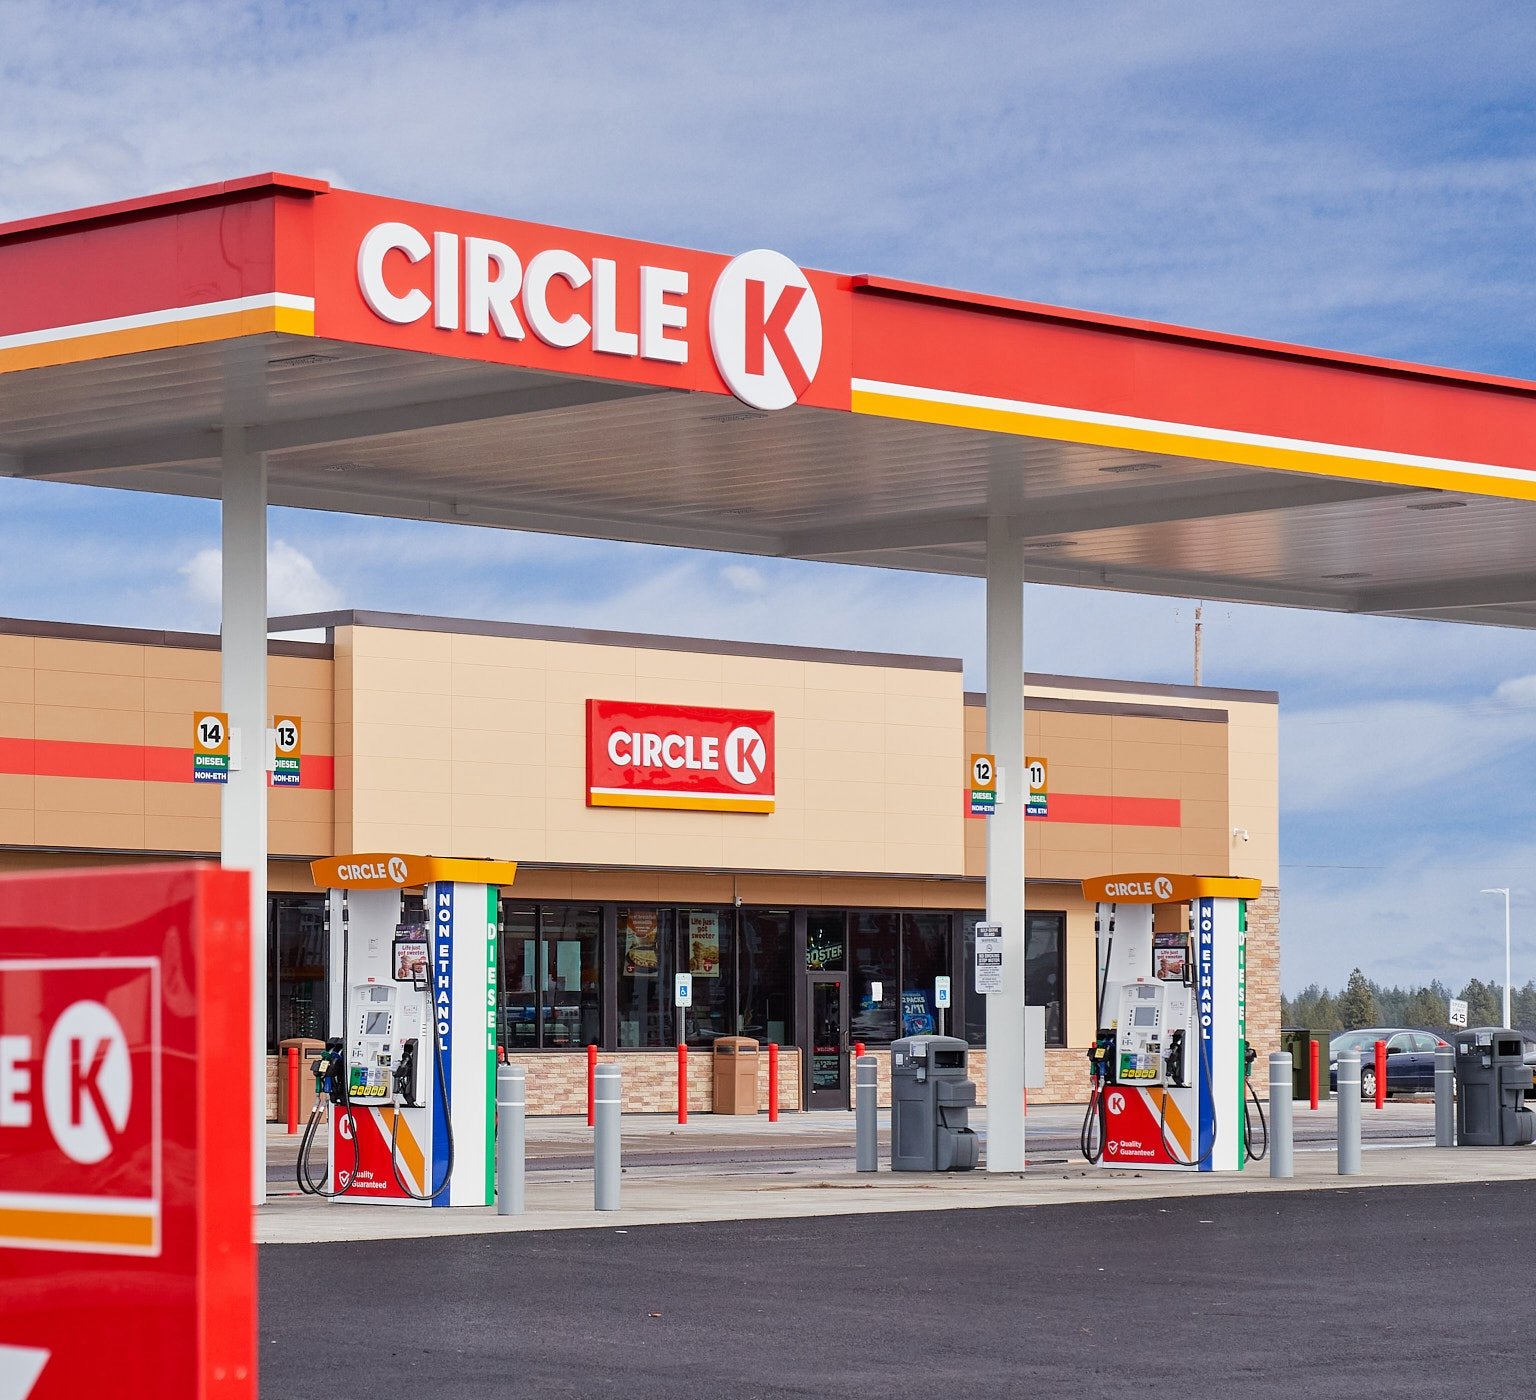 A New Circle K Project